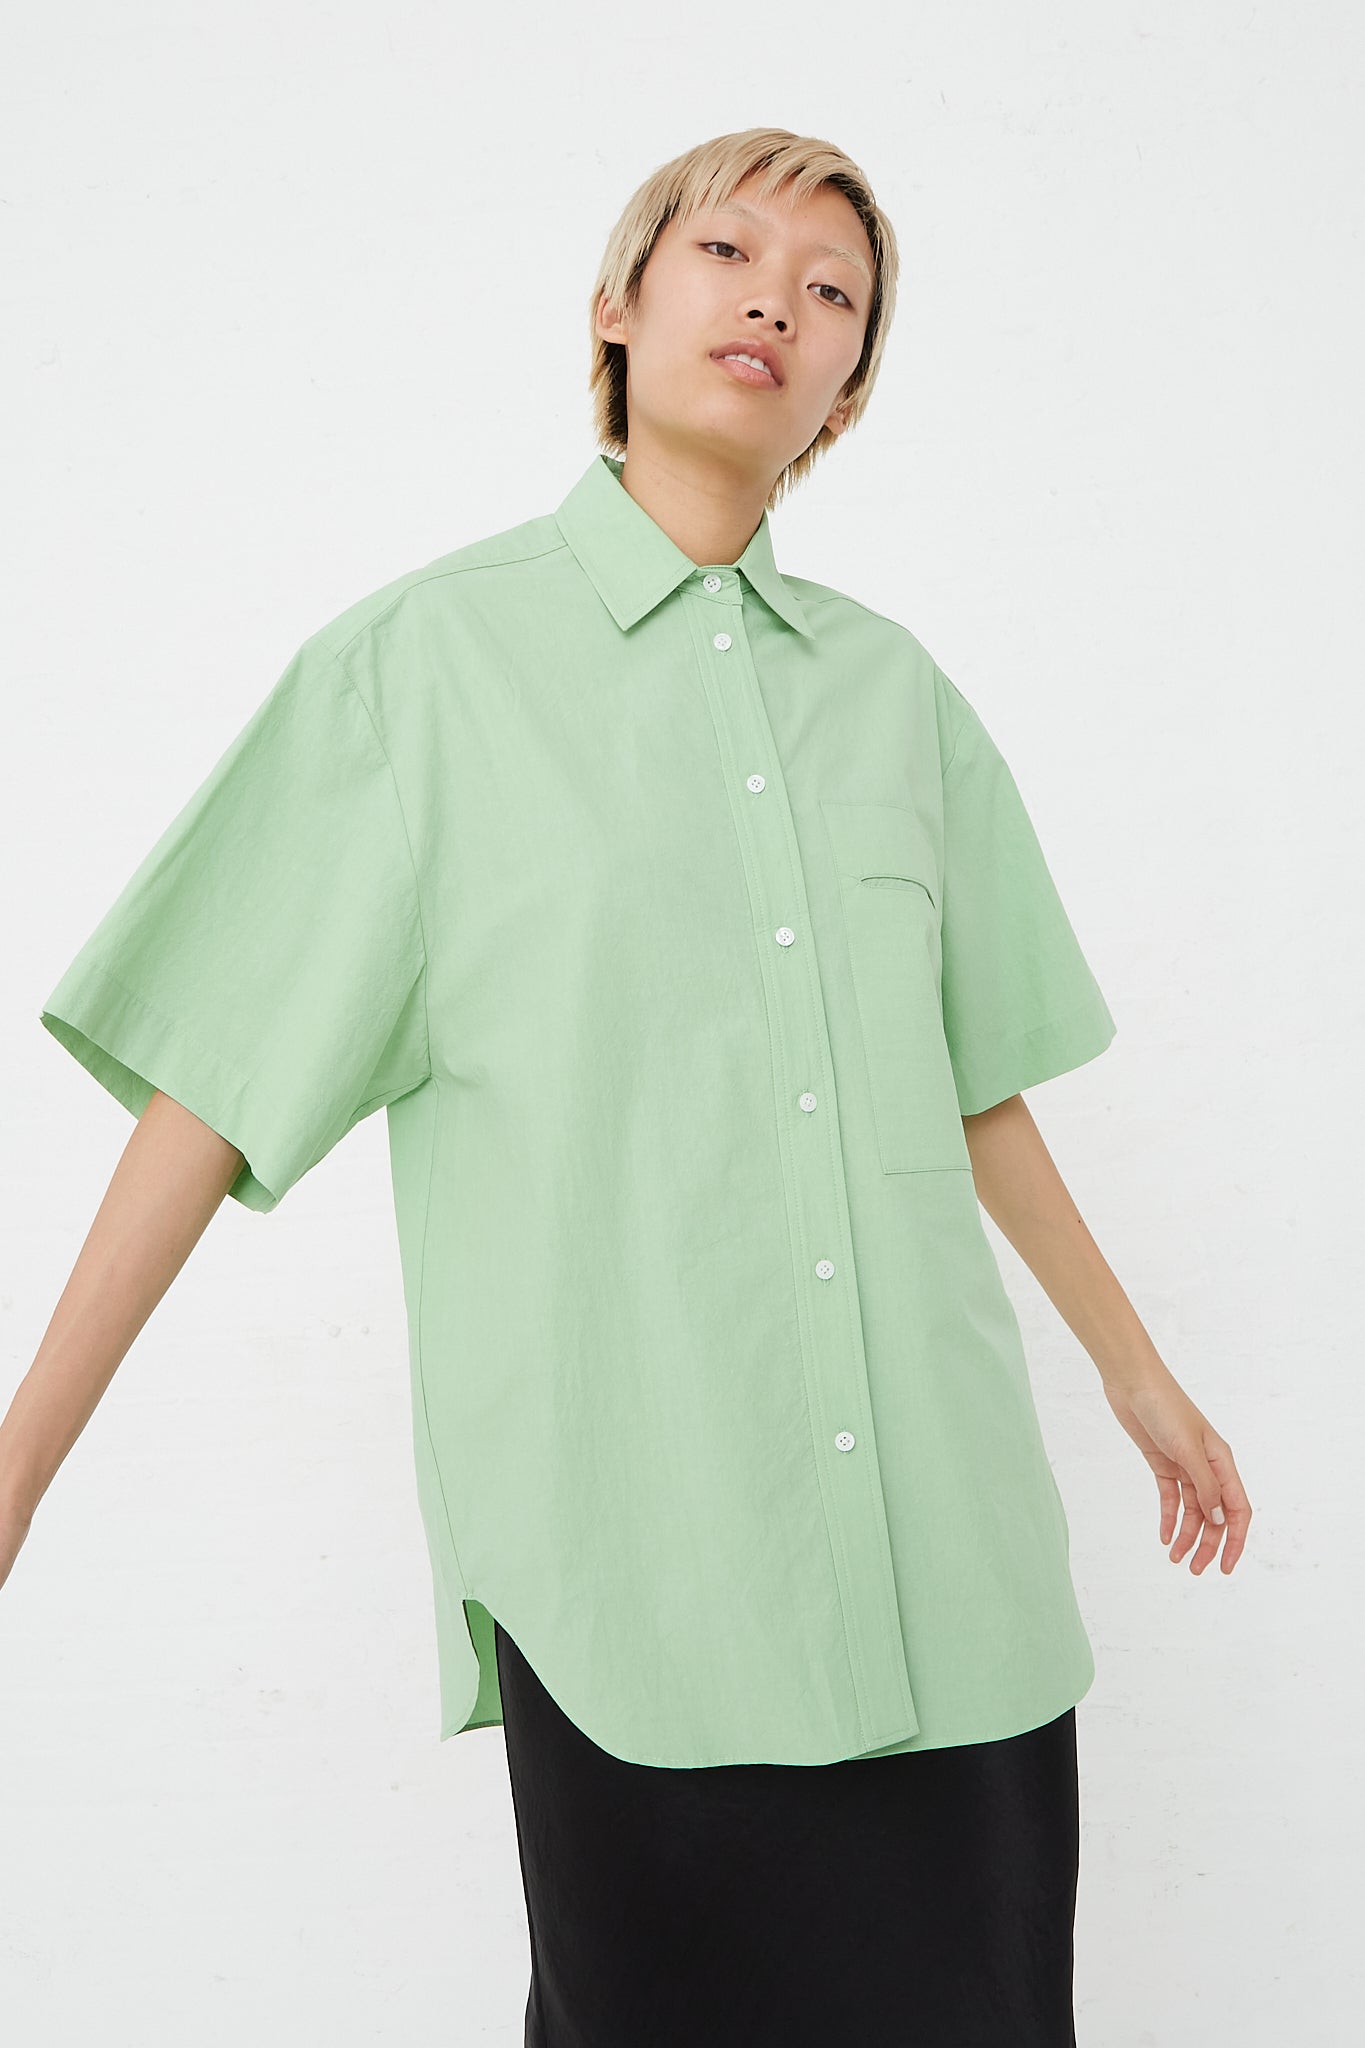 Nomia - Oversized Short Sleeve Shirt in Chlorophyll front view